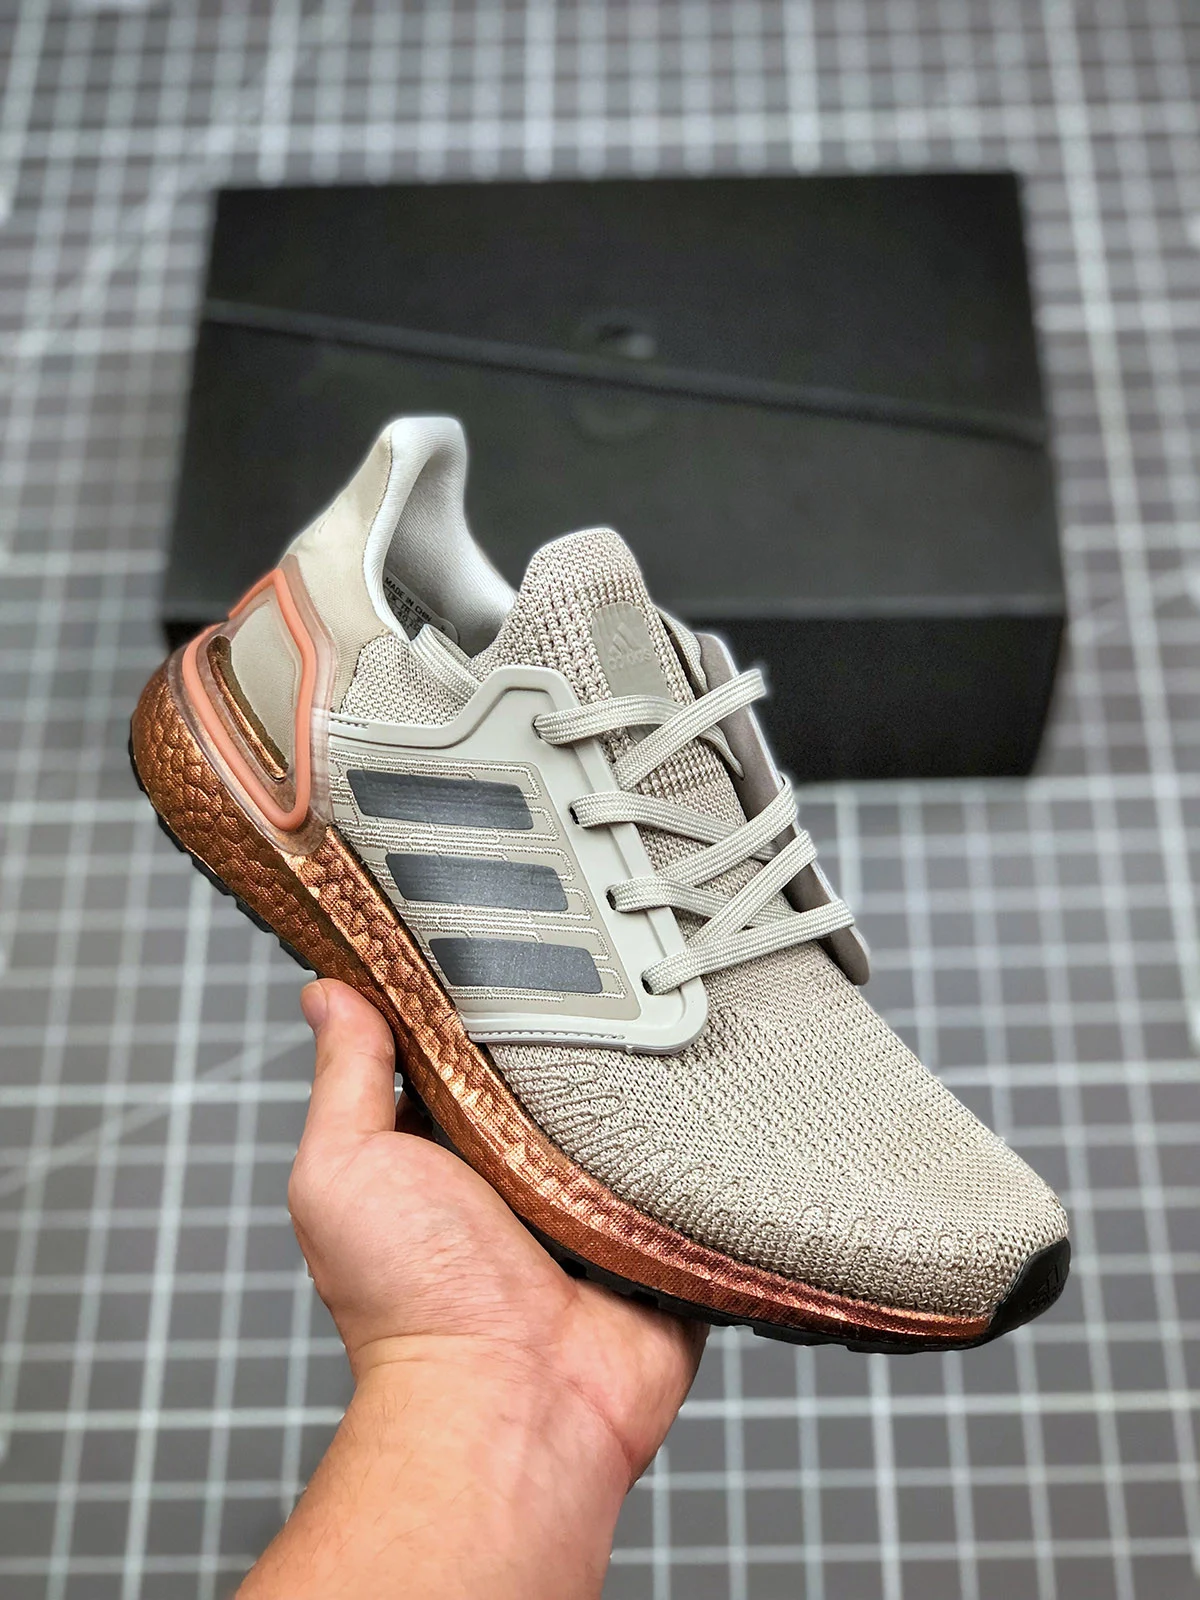 Adidas Ultra Boost 20 Metal Grey Grey Five Signal Coral For Sale